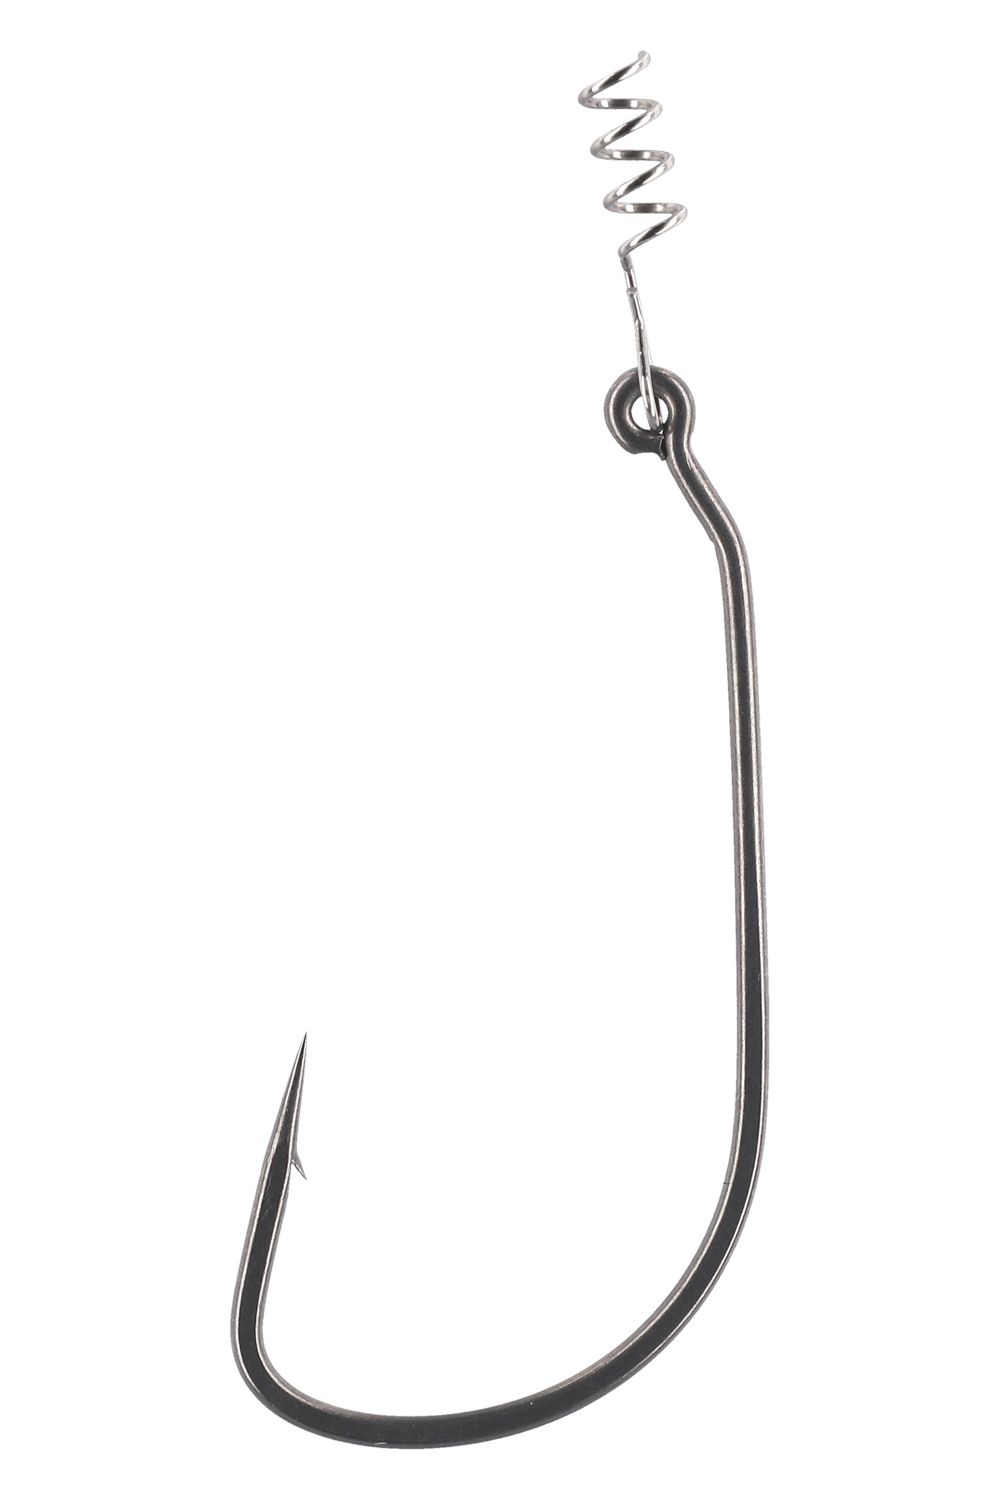 Mikado Offset Weedless Worm Hook With Screw Size: 5/0 – Glasgow Angling  Centre